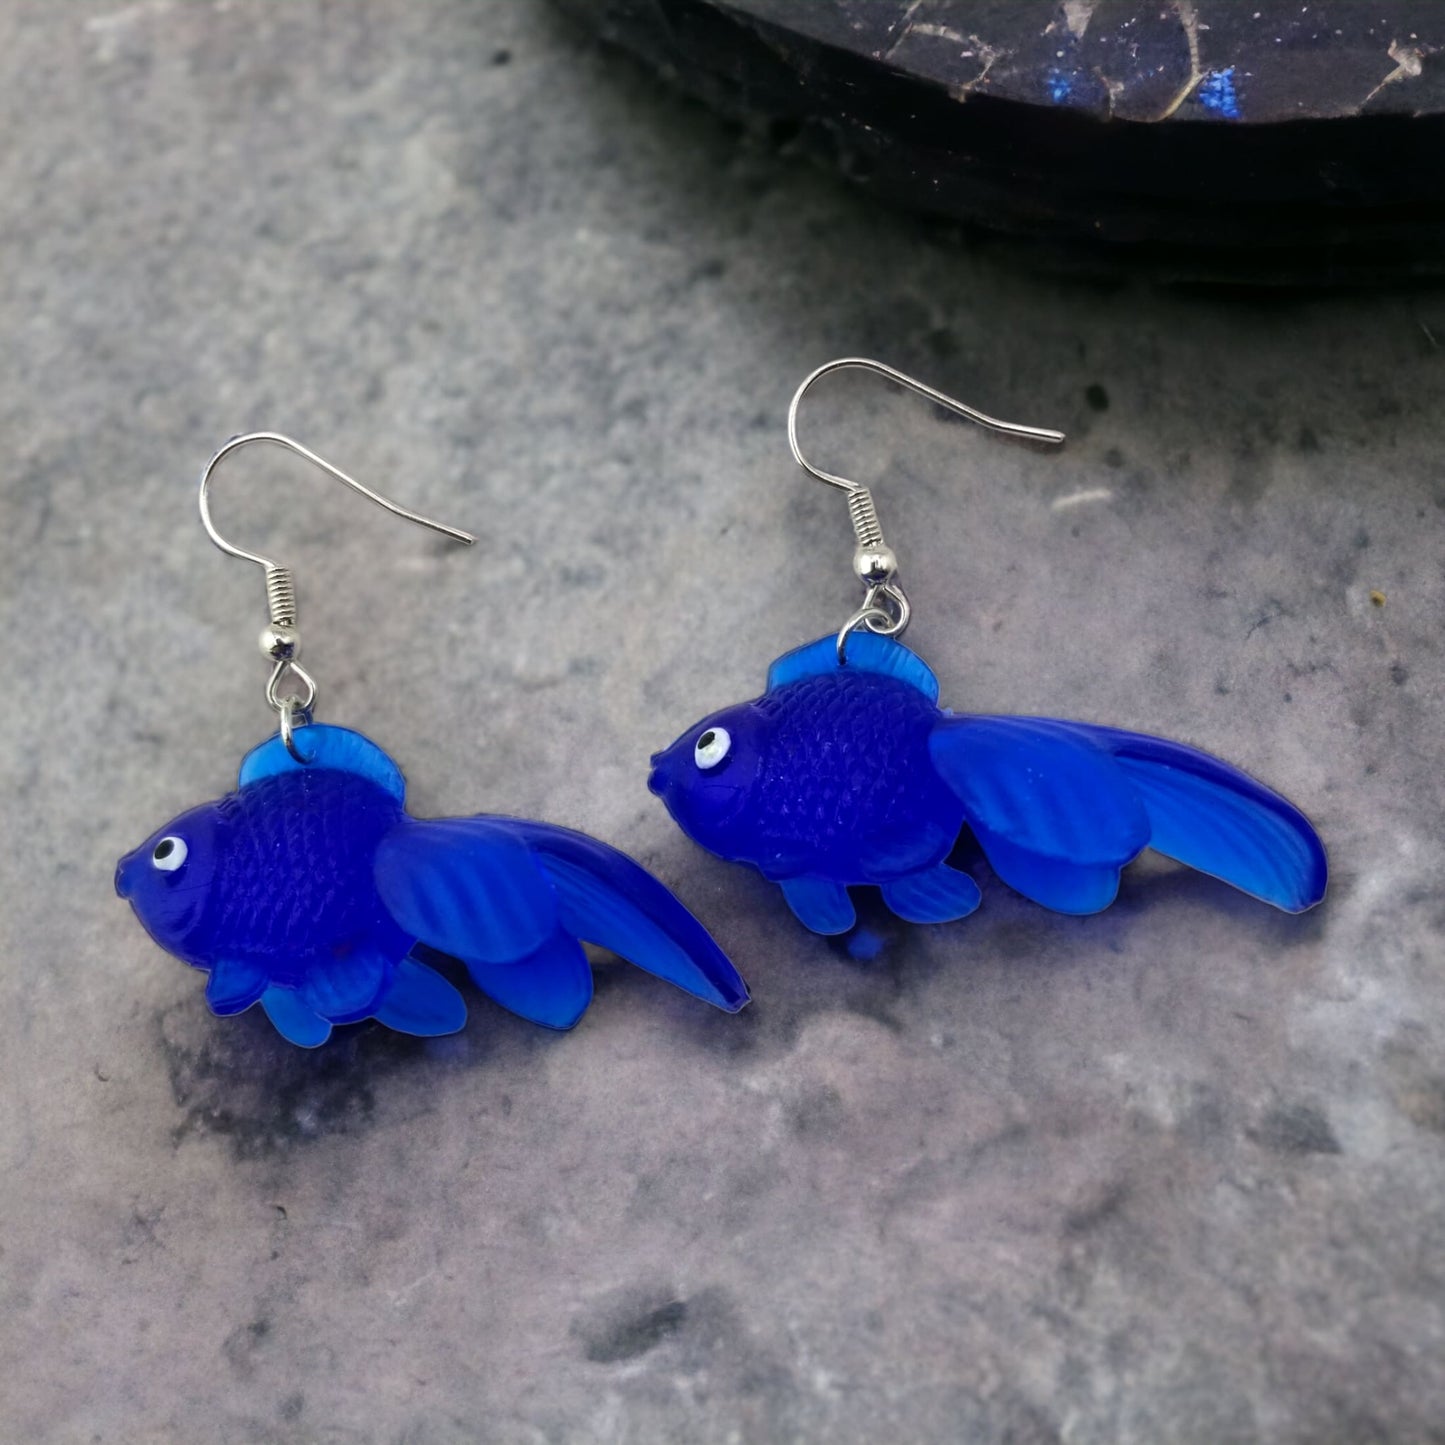 Funny Vibrant Fish Earrings from Confetti Kitty, Only 7.99